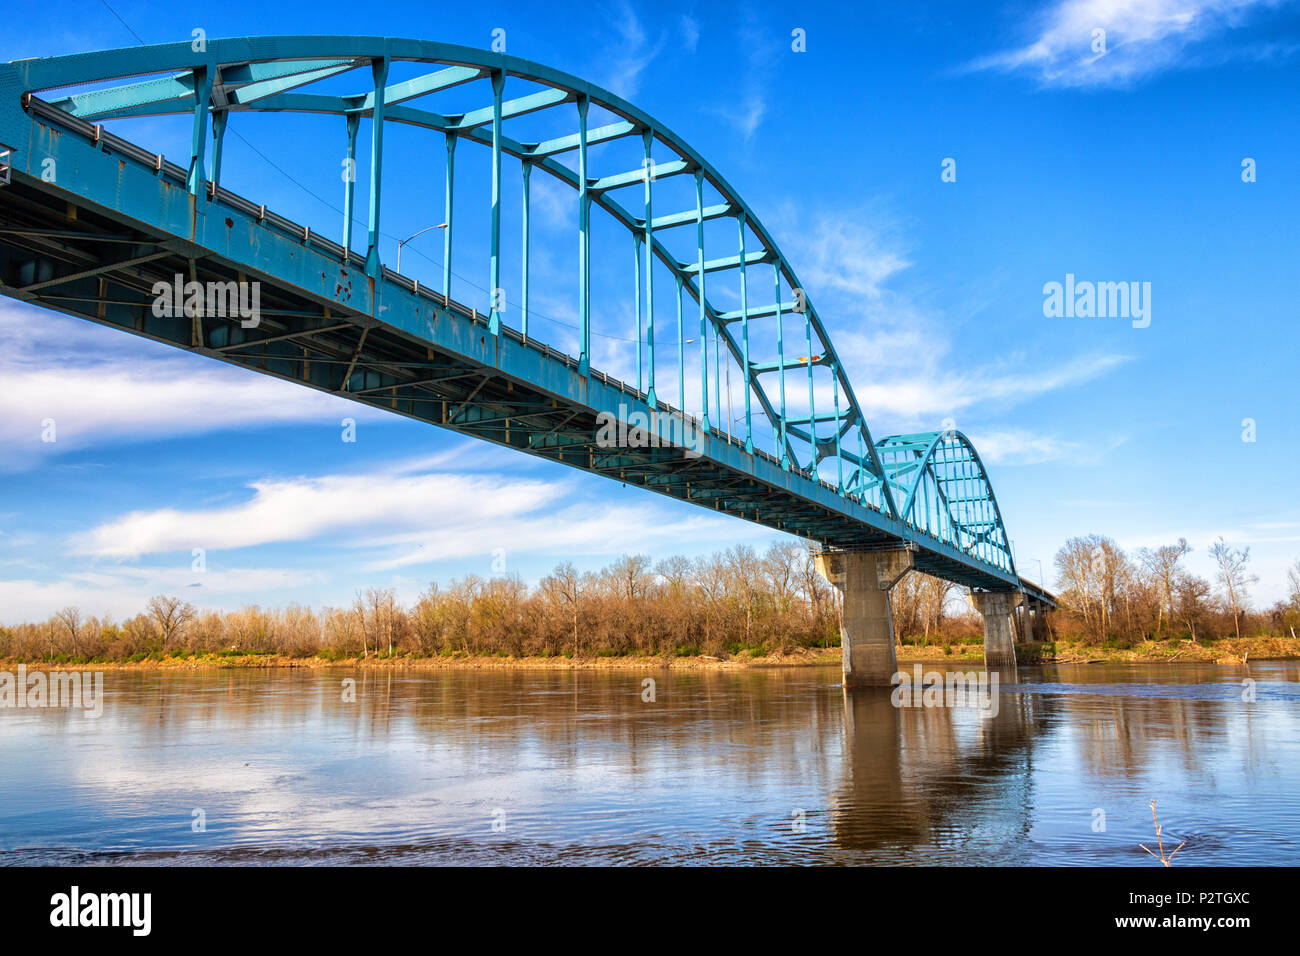 Missouri river bridge at Leavenworth Kansas, there is nice reflection in water and vivid colors Stock Photo